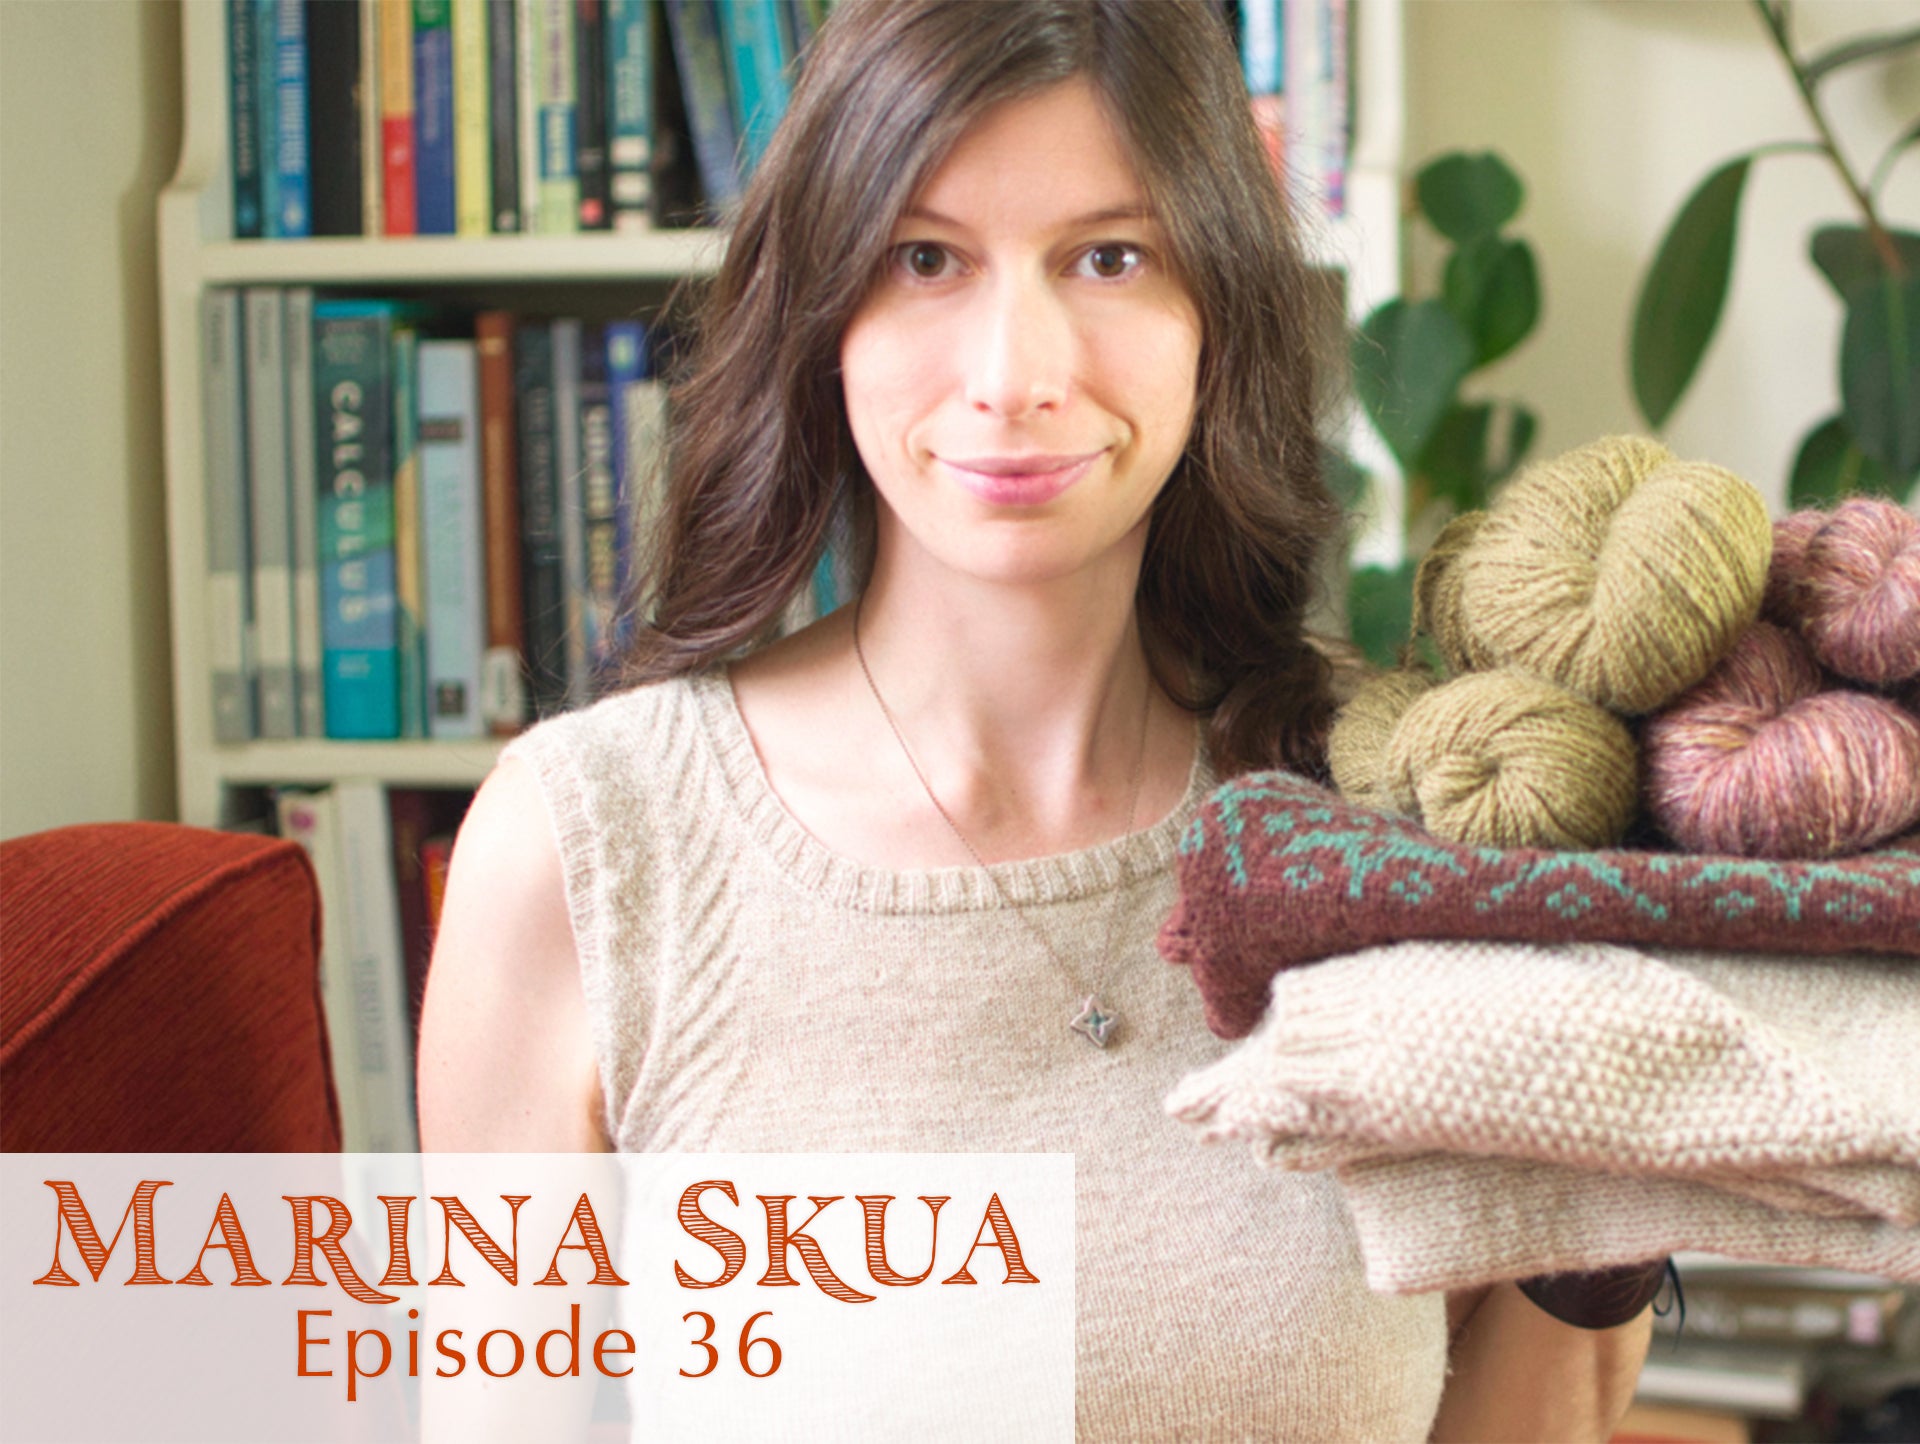 Episode 36 of the Podcast – Knitting for a wet summer, yarn spinning and dyeing adventures